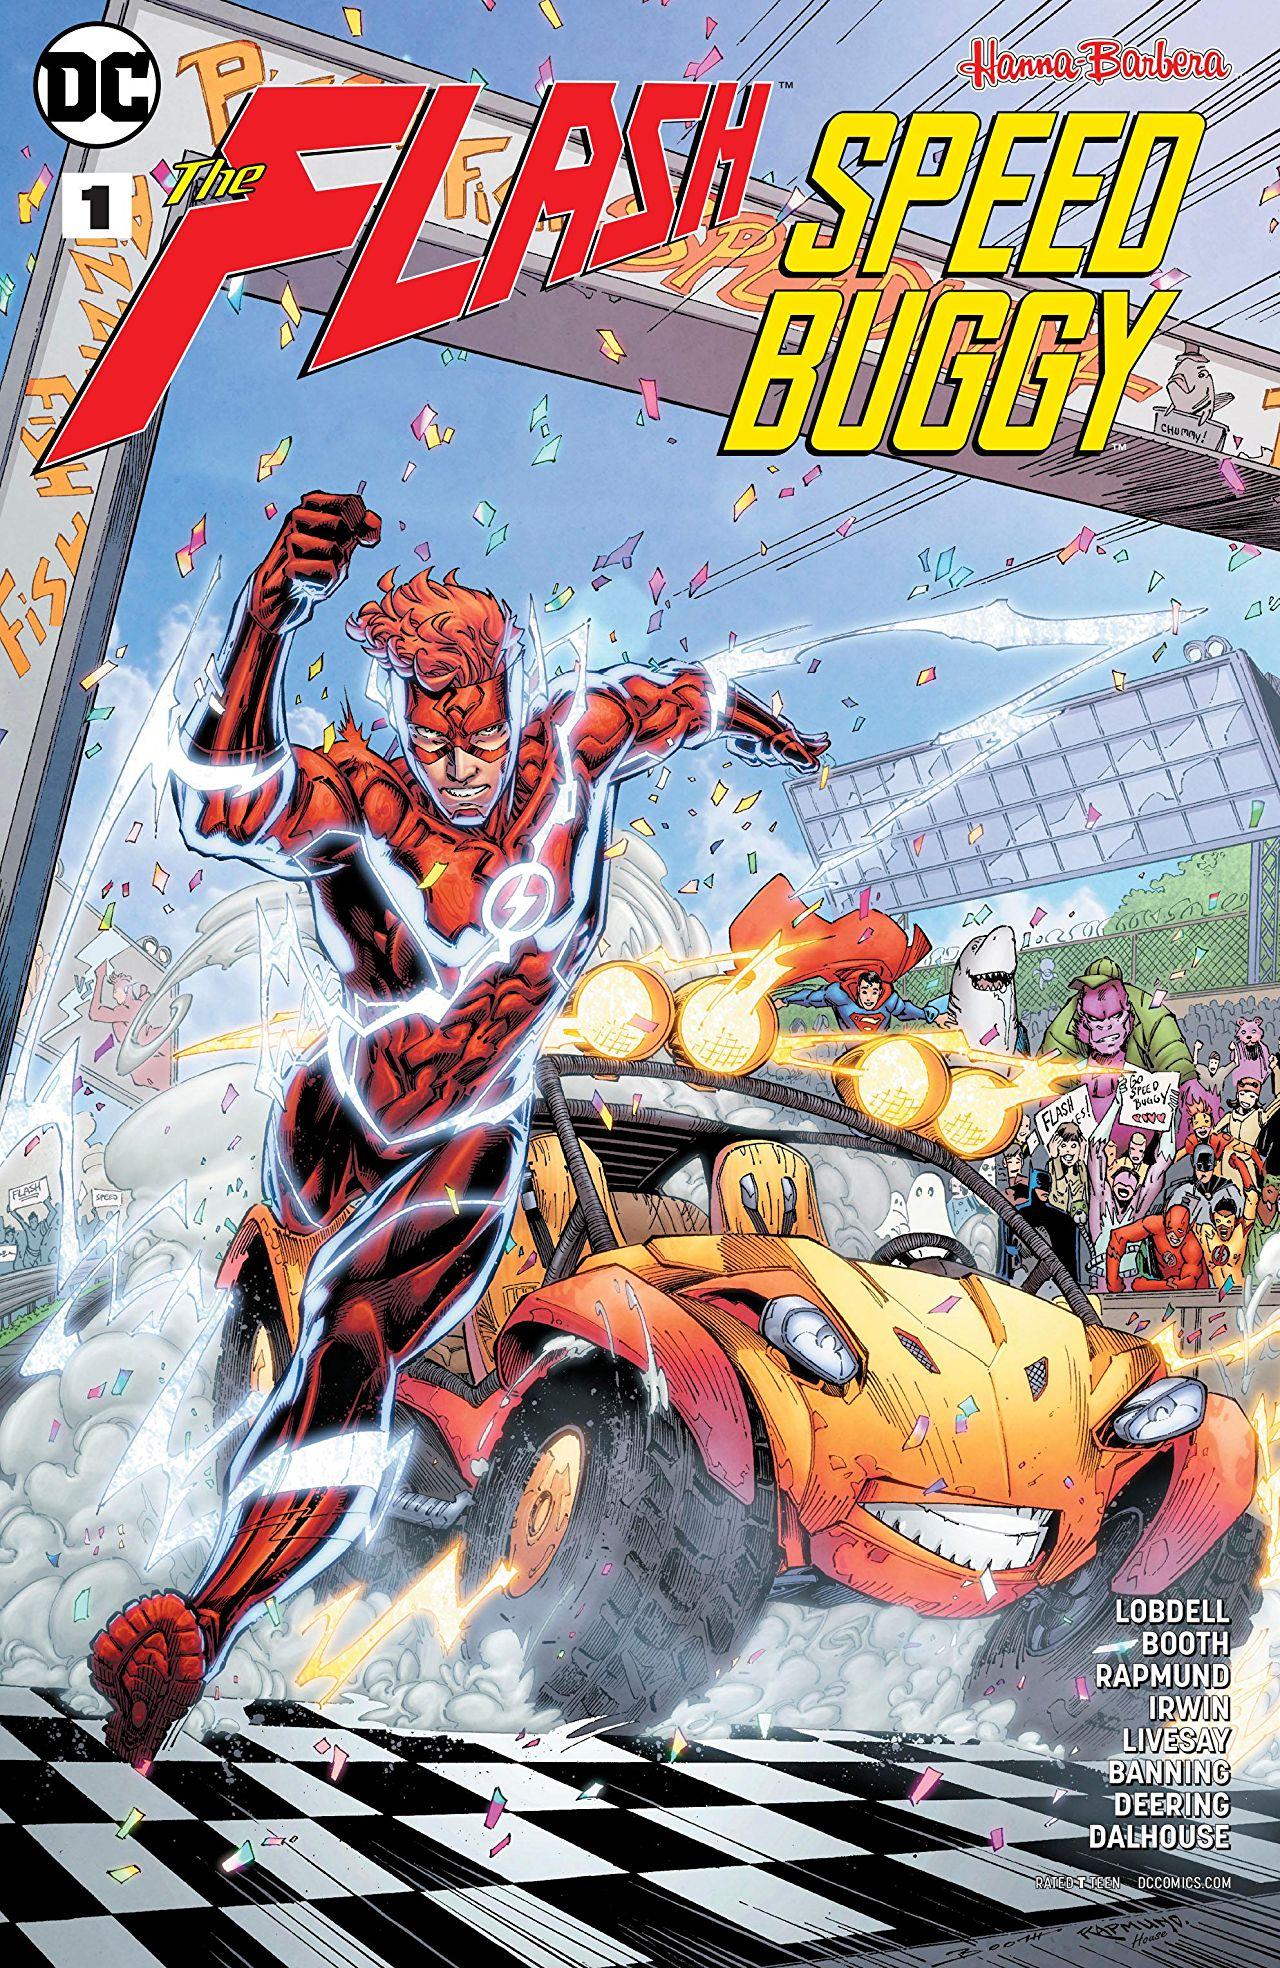 The Flash/Speed Buggy Special Vol. 1 #1